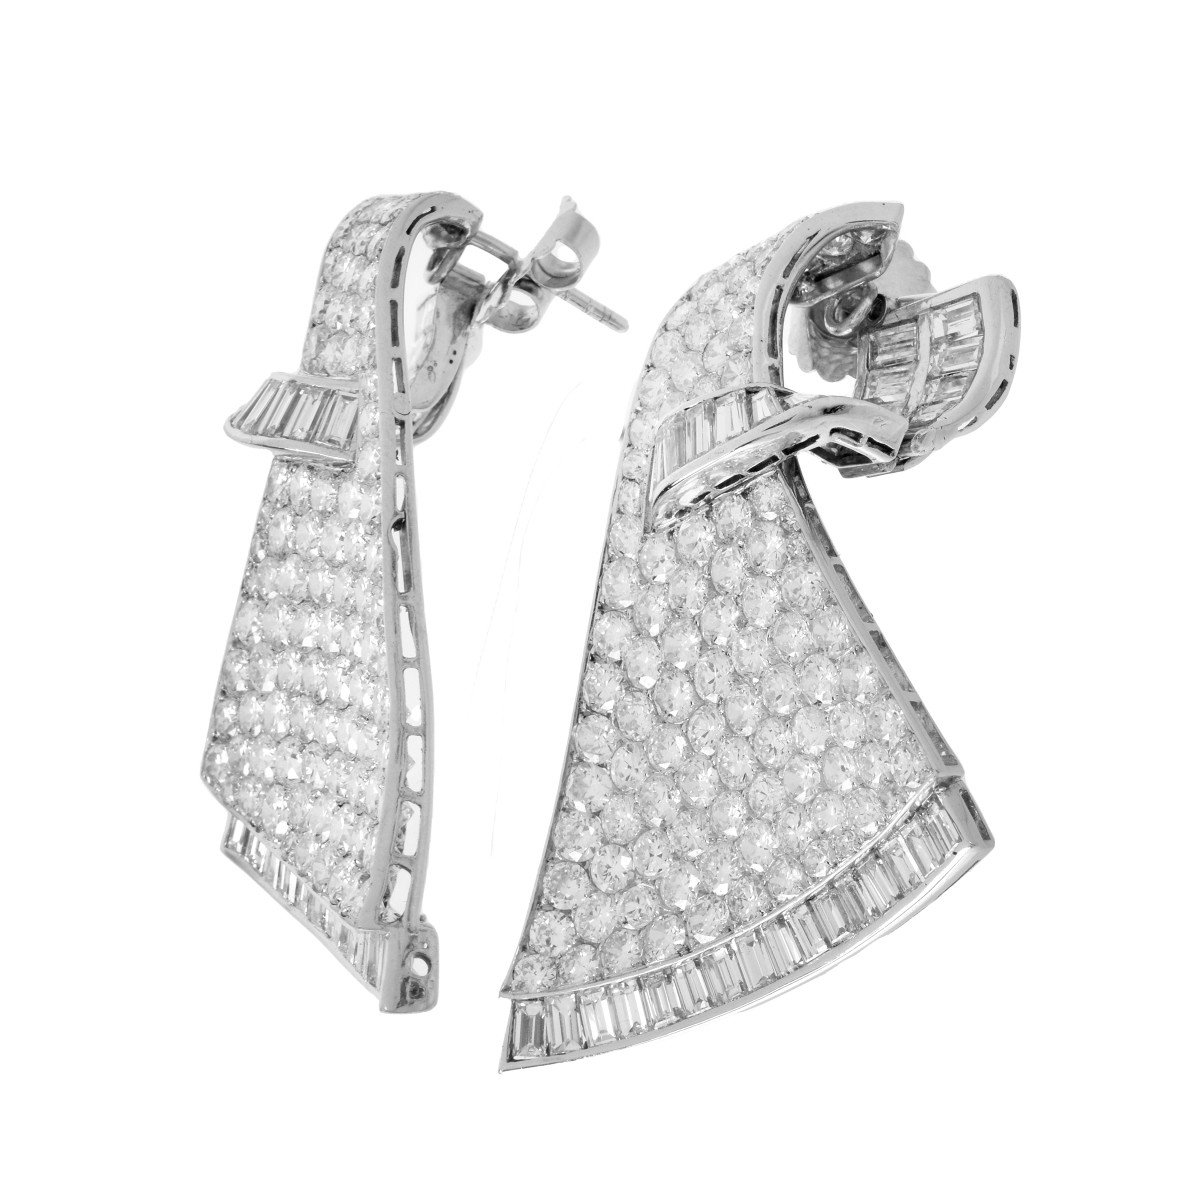 French Deco Diamond and Platinum Earrings